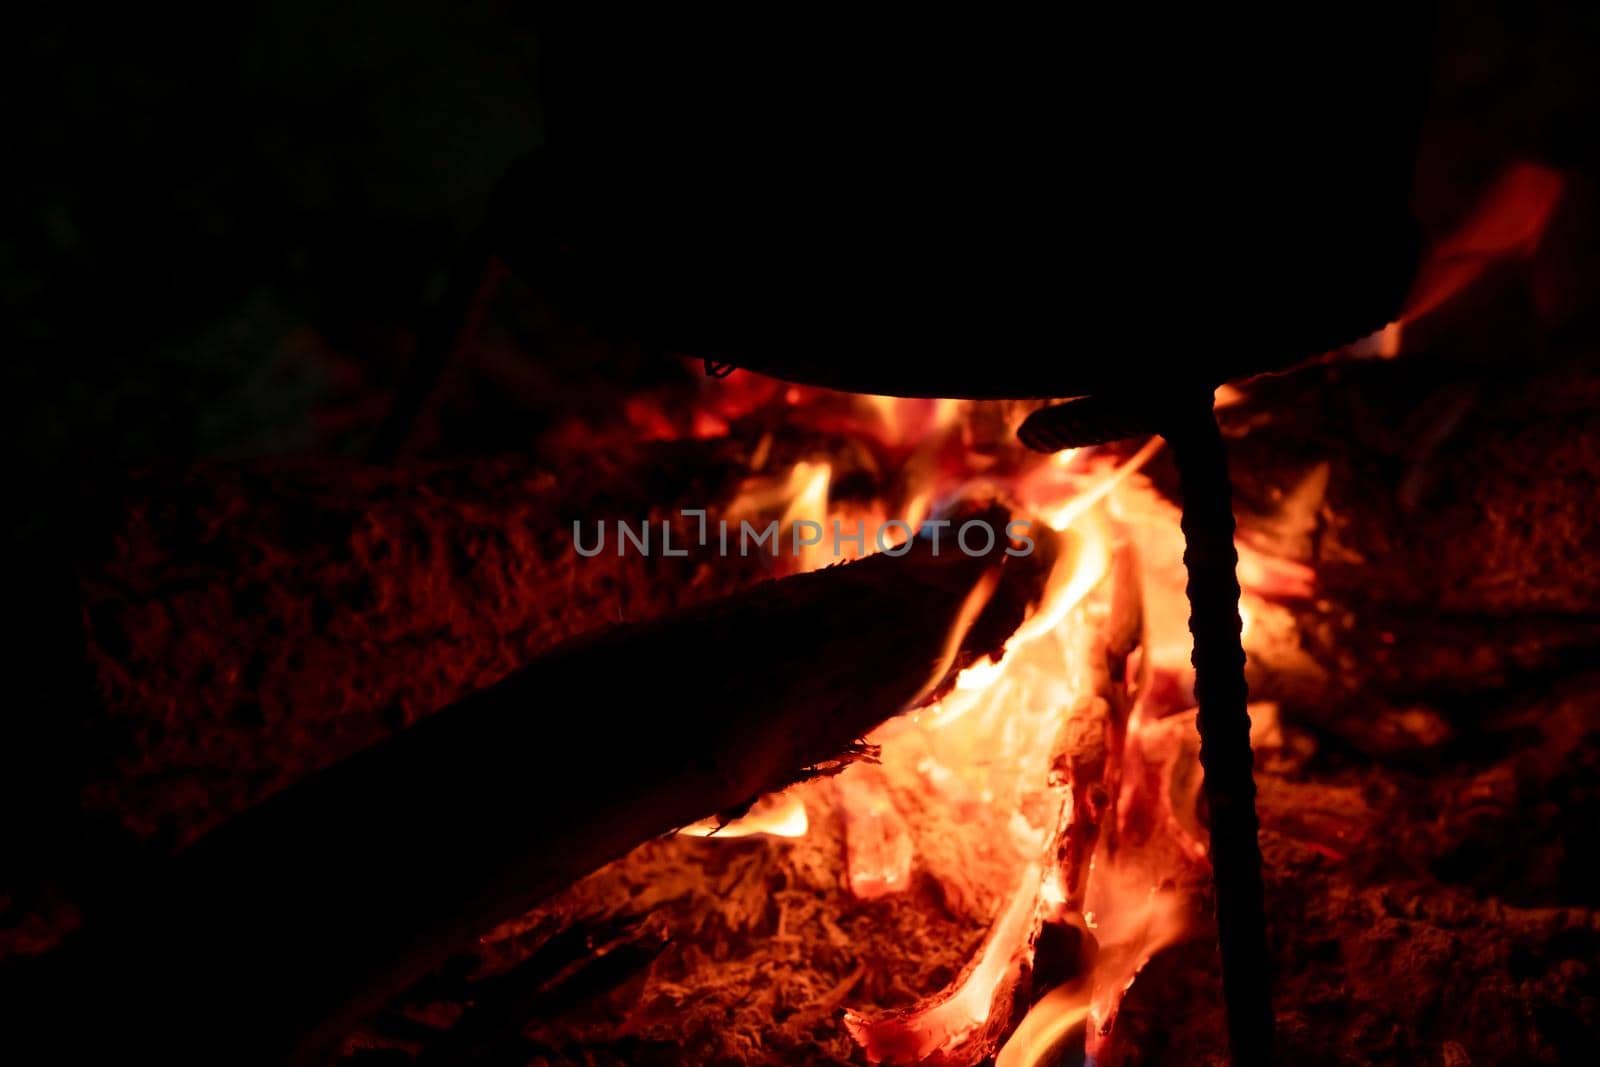 Food cooking on a bonfire at night. Firewood solid fuel for cook at campfire. Fire with orange flame on dark background. Burning wood for heating energy. Dinner at camping. Fire to keep warm at camp. by Fahroni